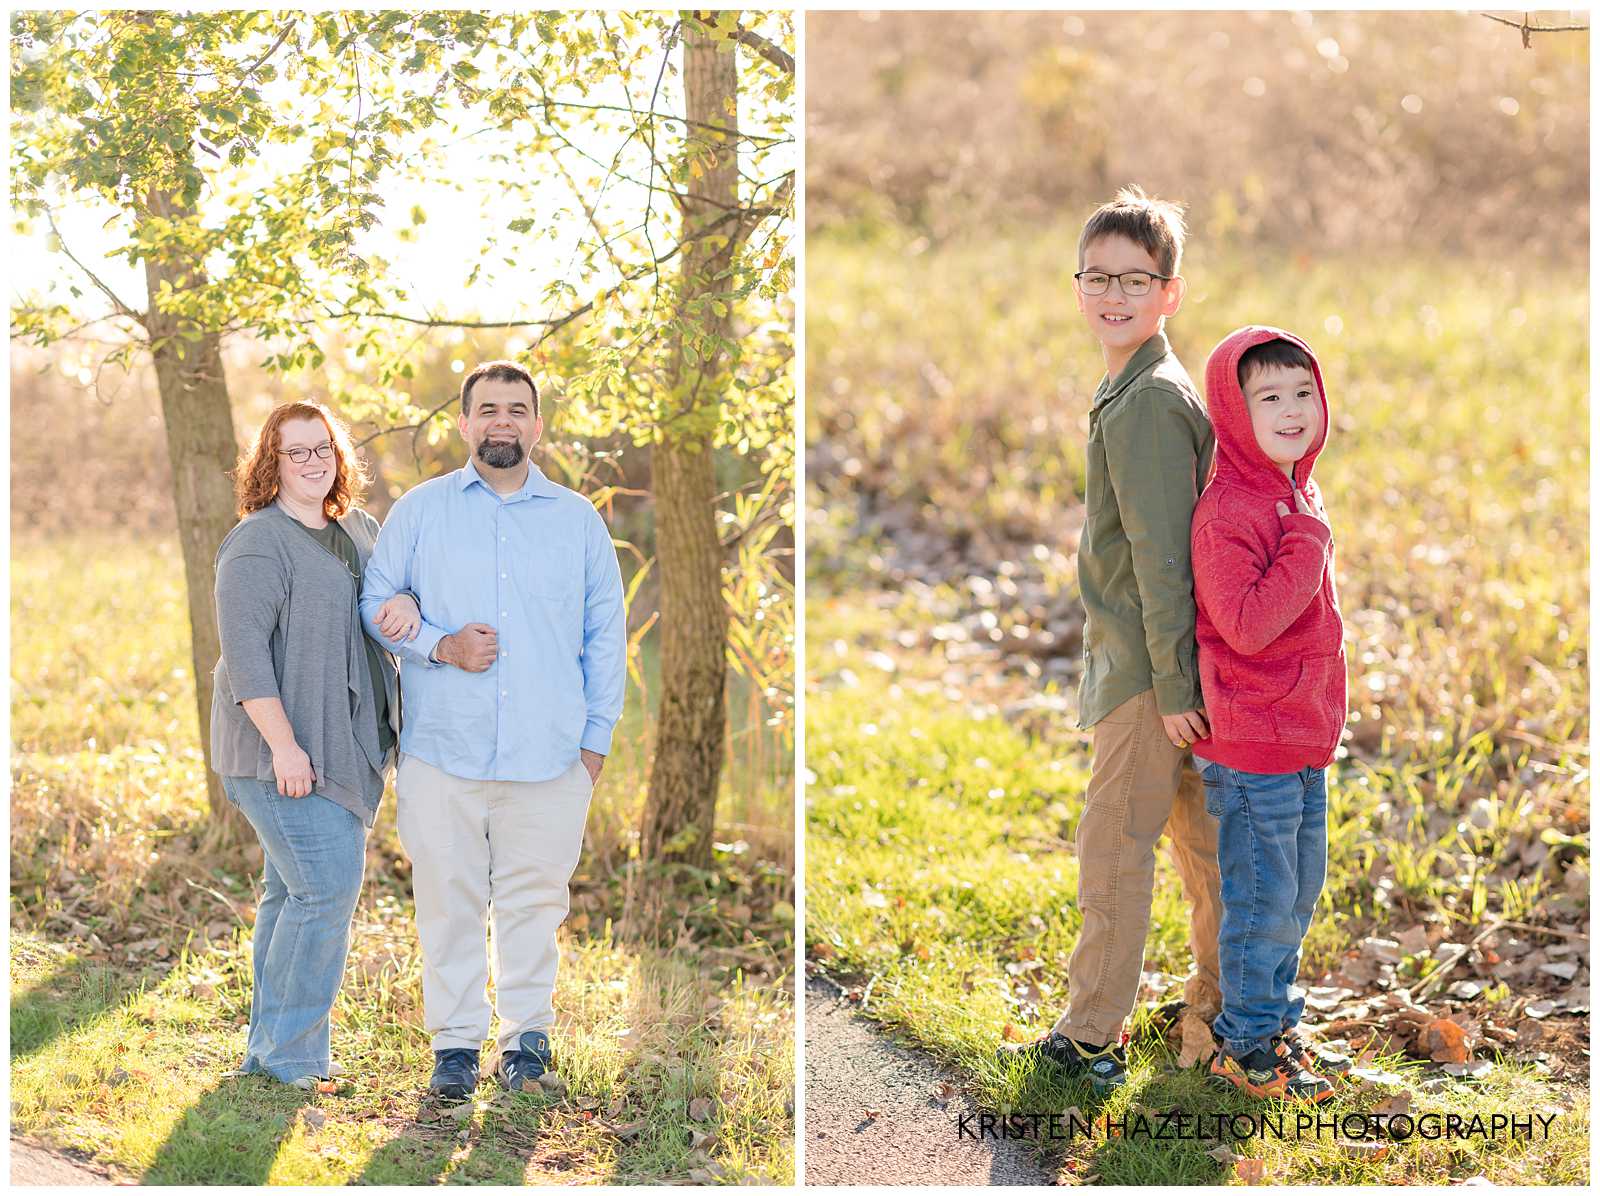 Portraits of a mom and dad and two brothers by Oak Park, IL and Brookfield IL photographer Kristen Hazelton